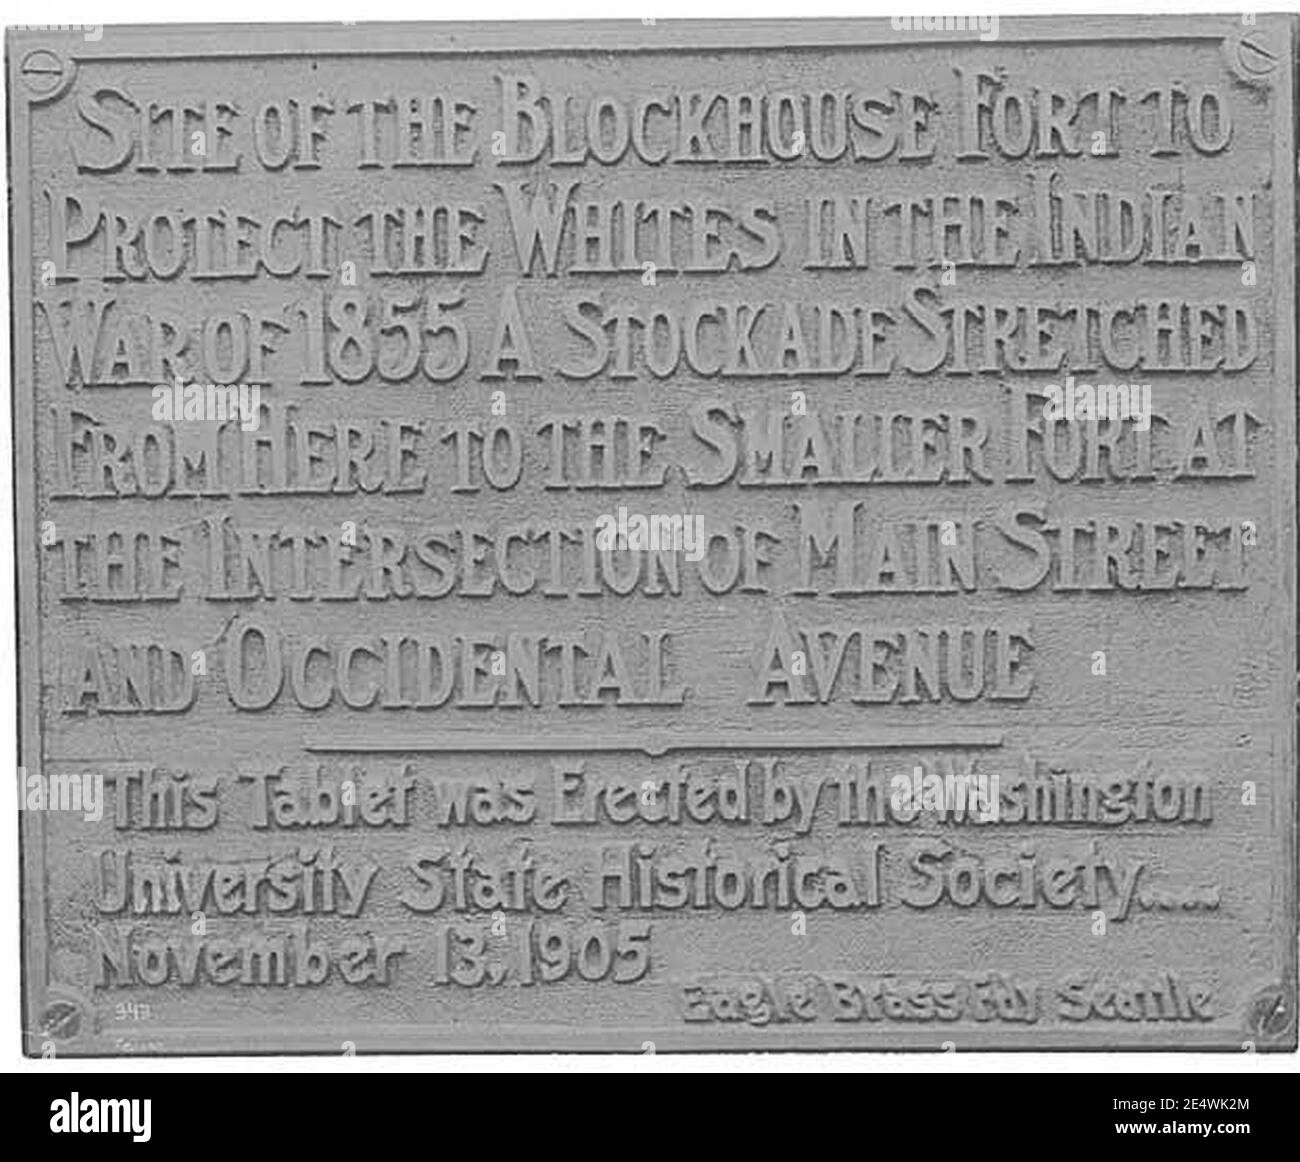 Memorial tablet for the blockhouse fort at Cherry St used during the Indian War of 1855, Seattle, ca 1905 (PEISER 22). Stock Photo